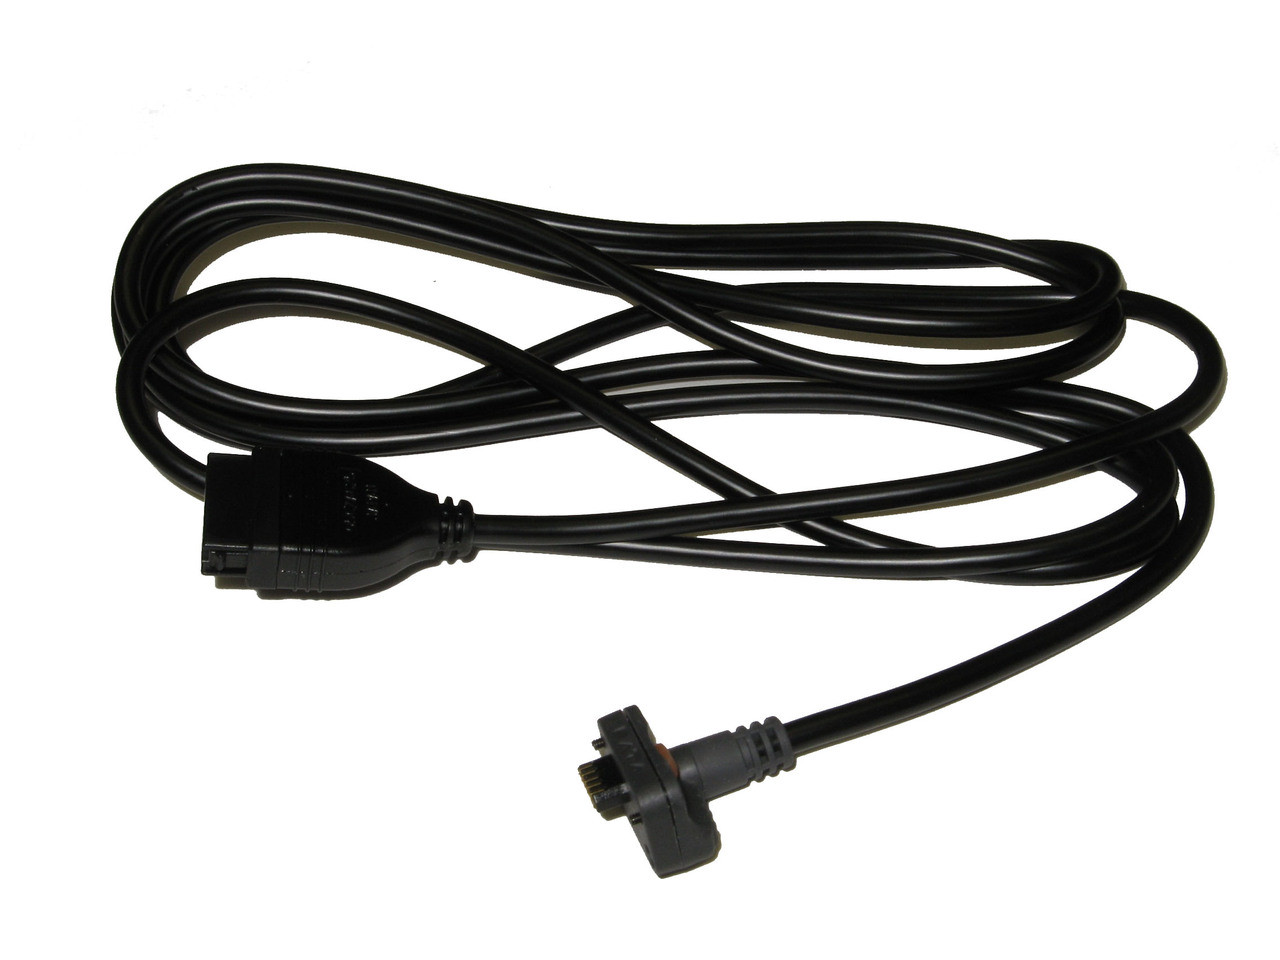 ASDQMS Mitutoyo Gage Cable 05CZA625 with Data Out Switch